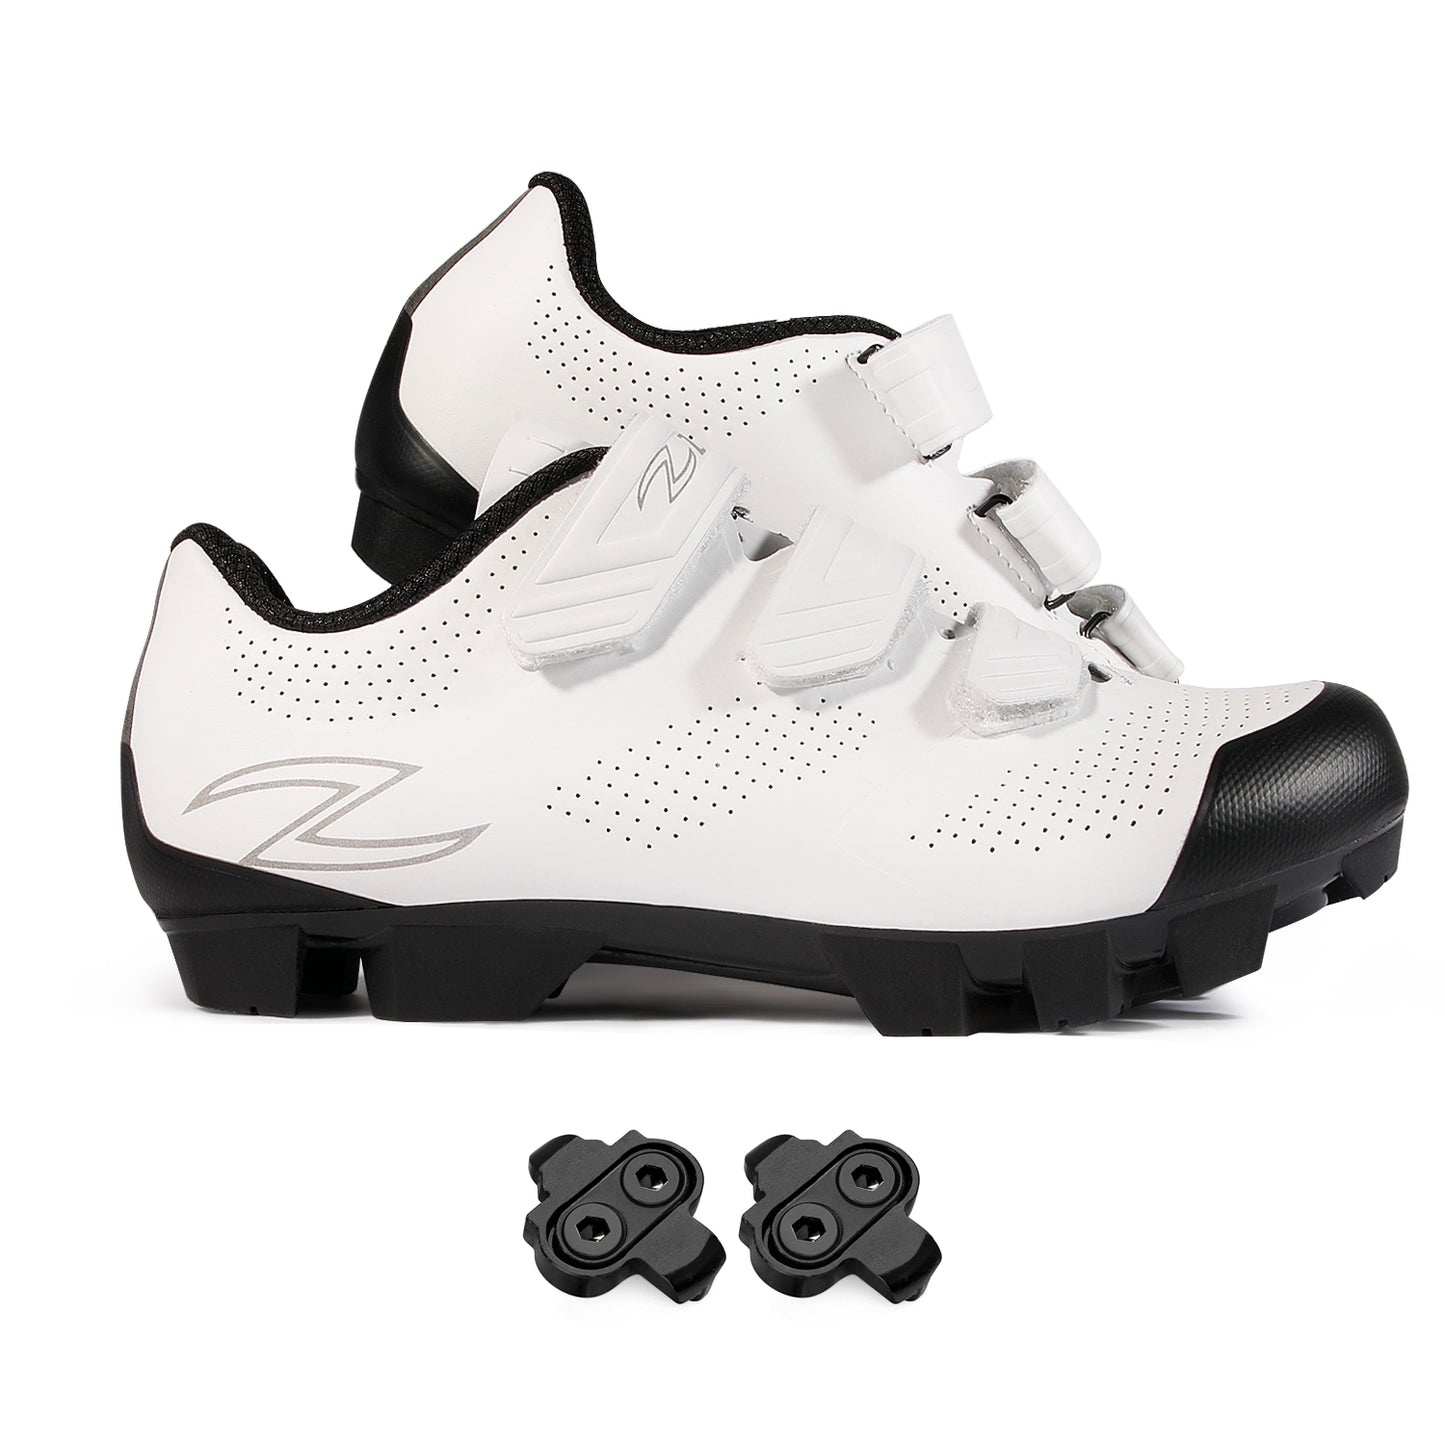 Zol Raptor  and Indoor Cycling Shoes with Spd Cleats - Zol Cycling